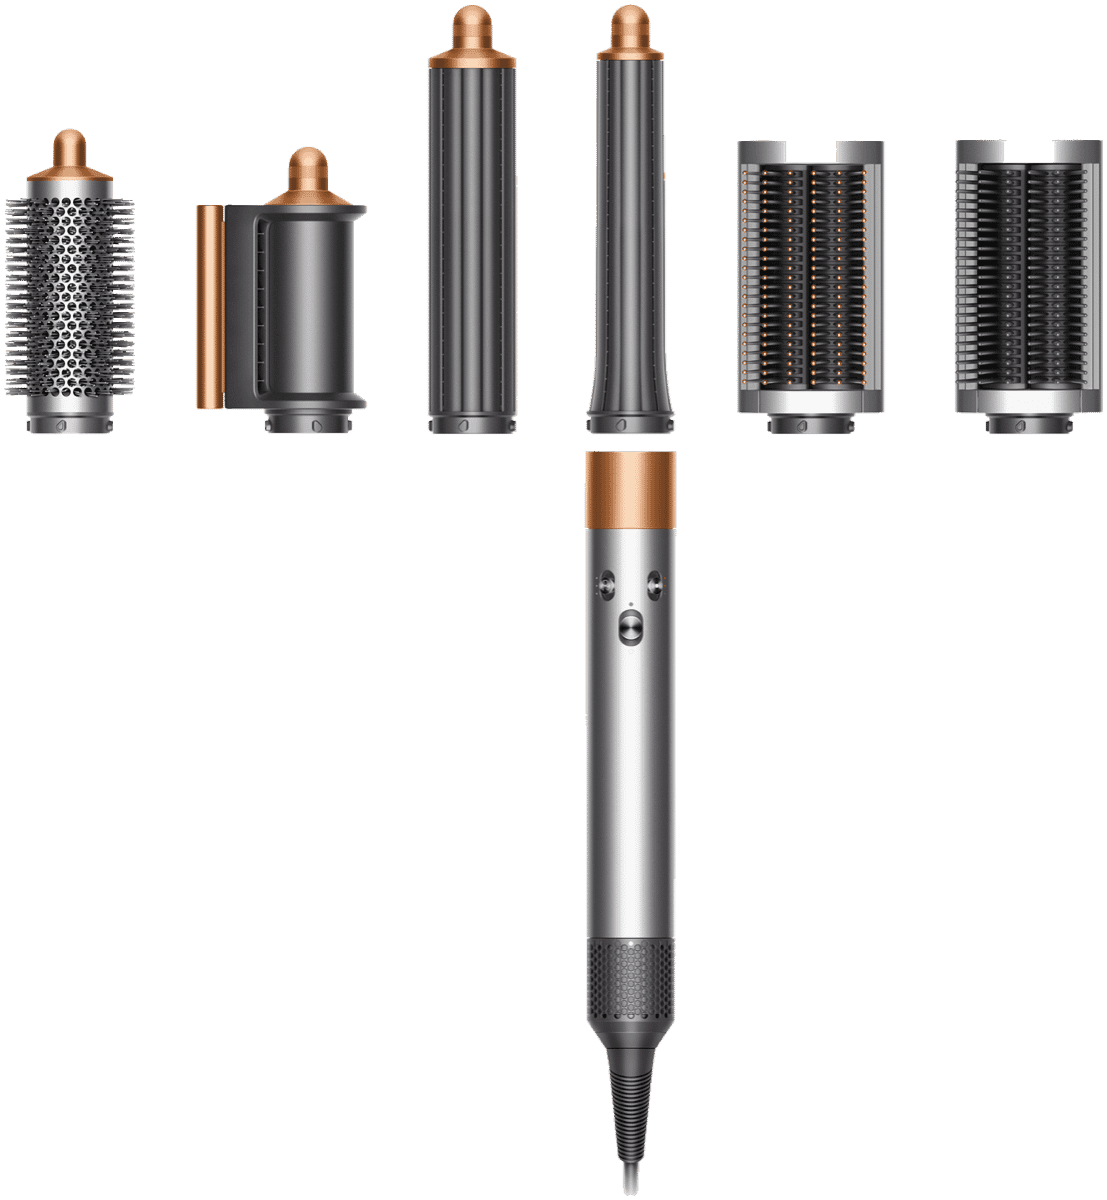 Dyson 400722-01 Airwrap Multi-Styler Long Nickel/Copper at The Good Guys